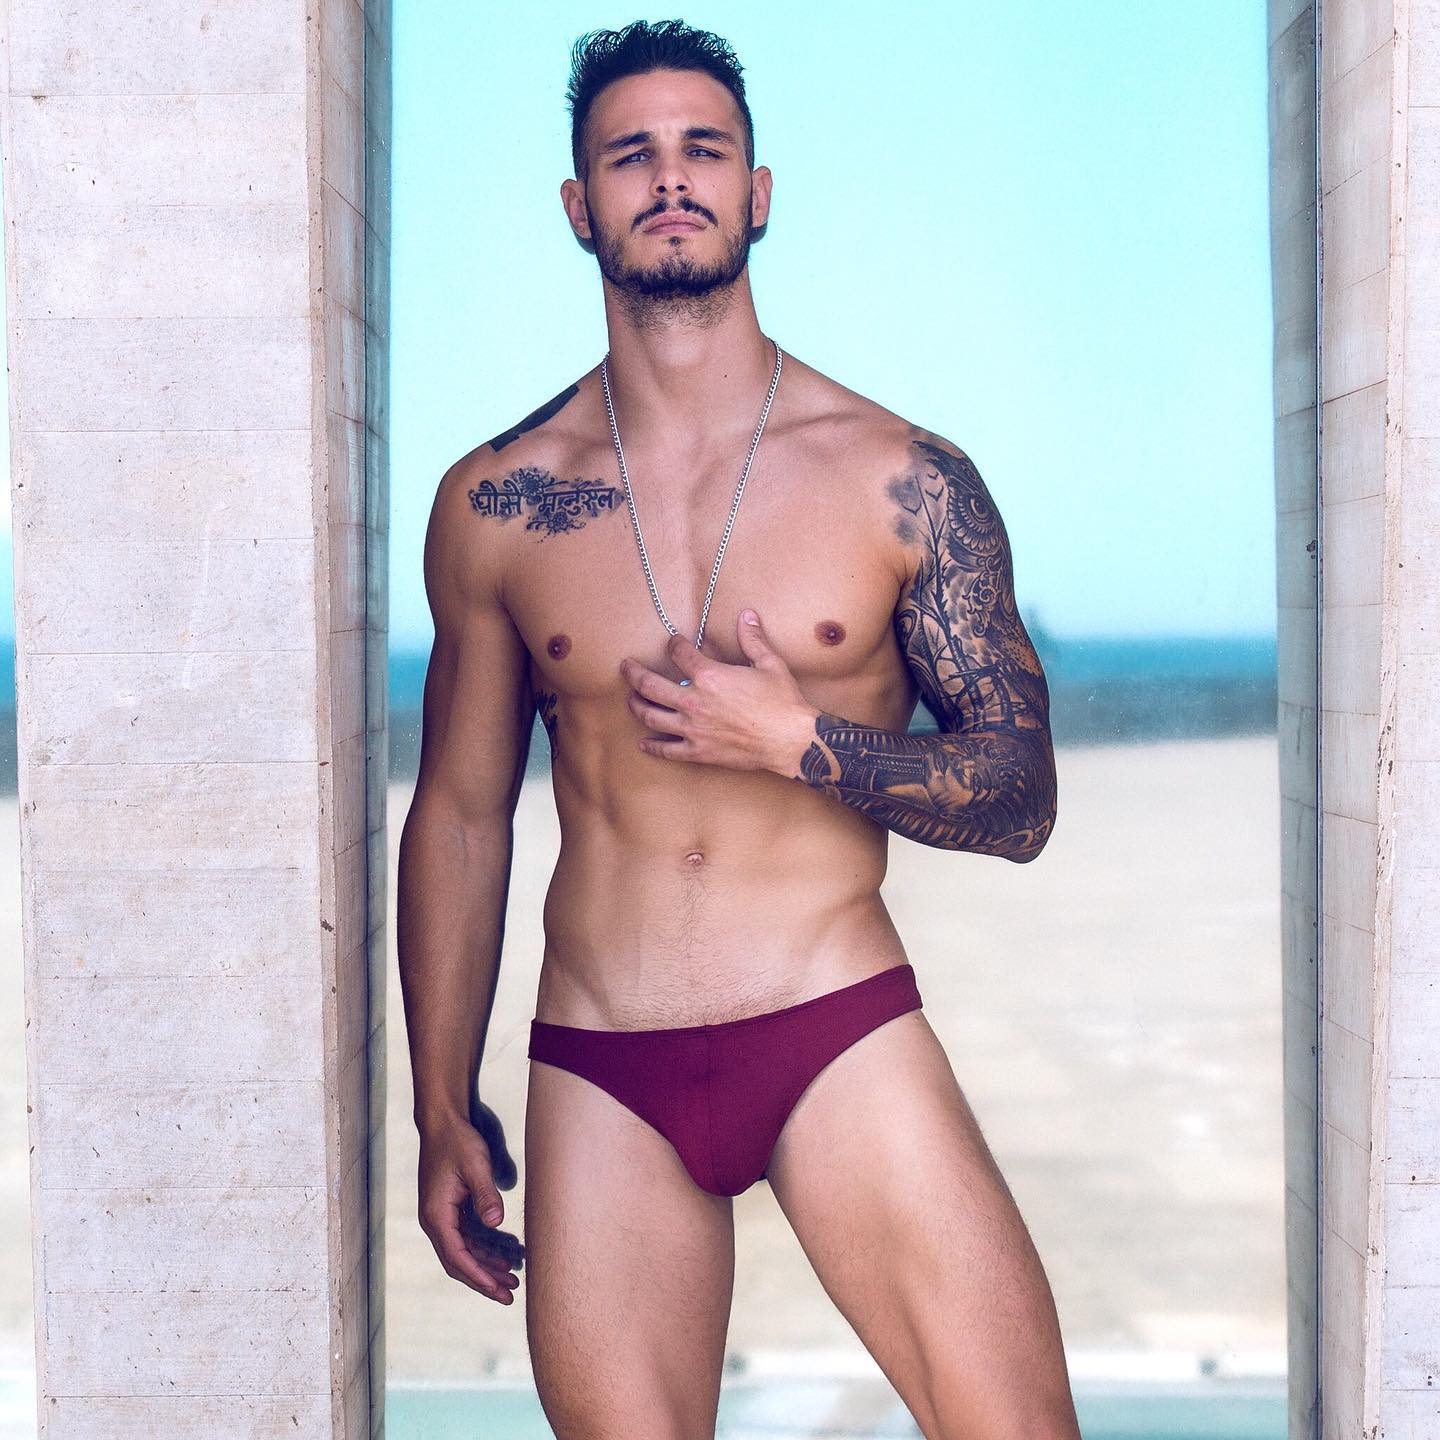 Made from top quality polyester and elastane blend, the Adam Smith Bikini Briefs are comfortable and cut perfectly to fit the male anatomy:
____
https://menandunderwear.com/shop/underwear/adam-smith-bikini-briefs-burgundy